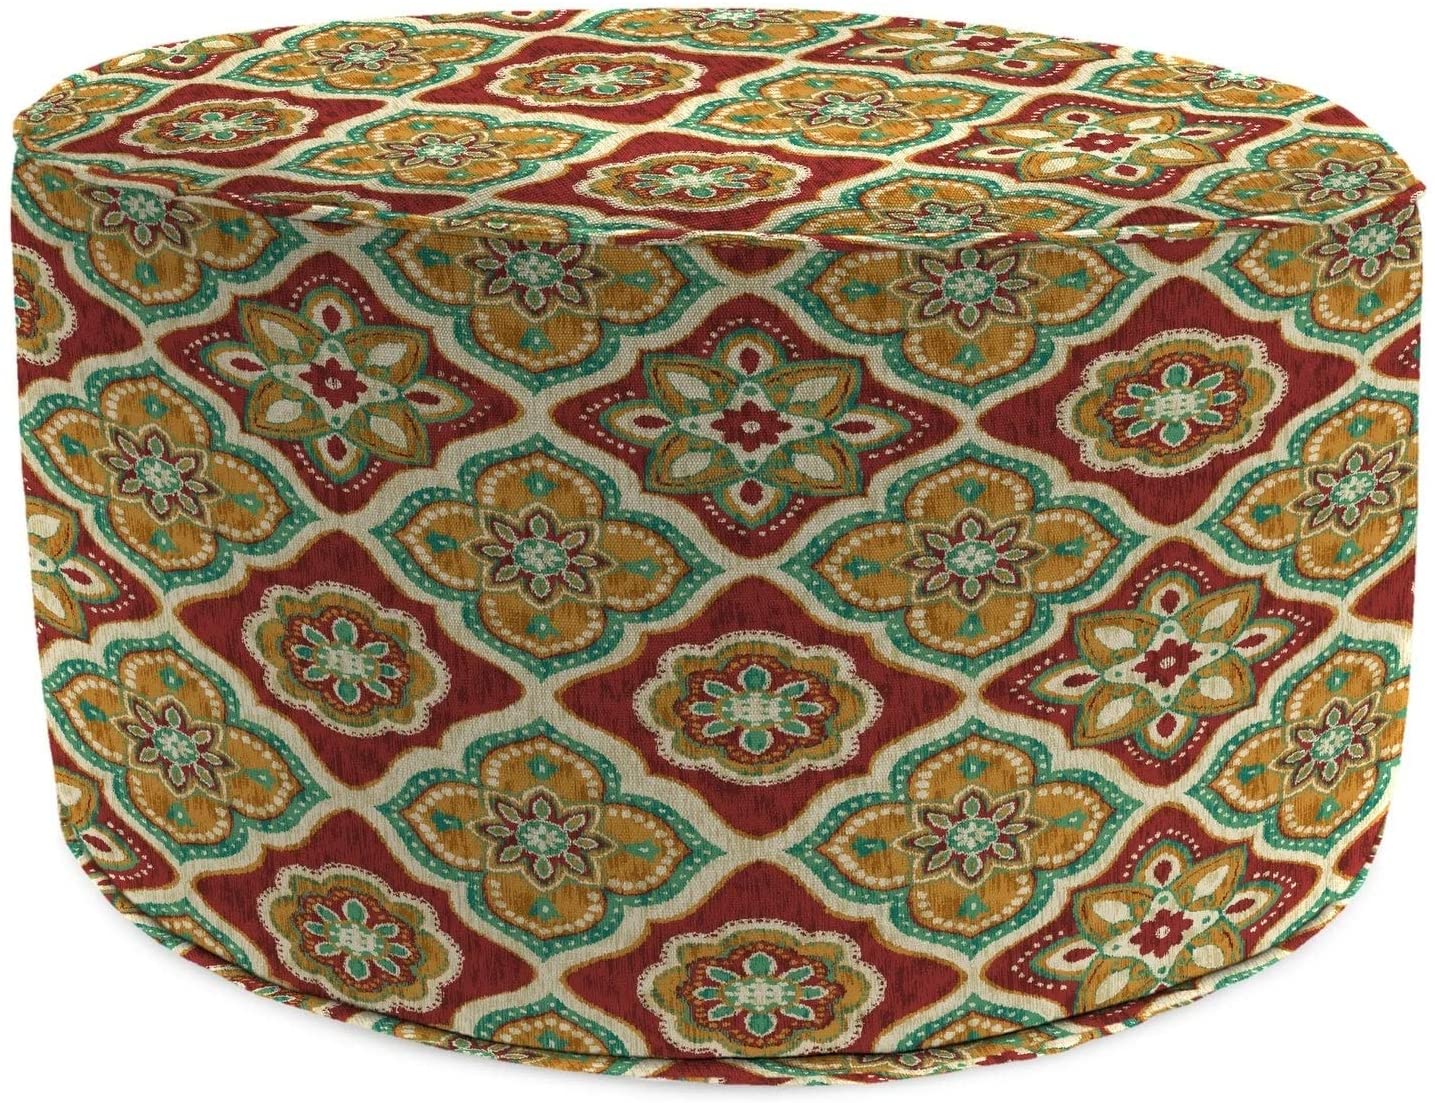 24" Round Pouf Jewel 24x24x13 5 Color Geometric Patterned Polyester Uv Resistant Zippered Closure